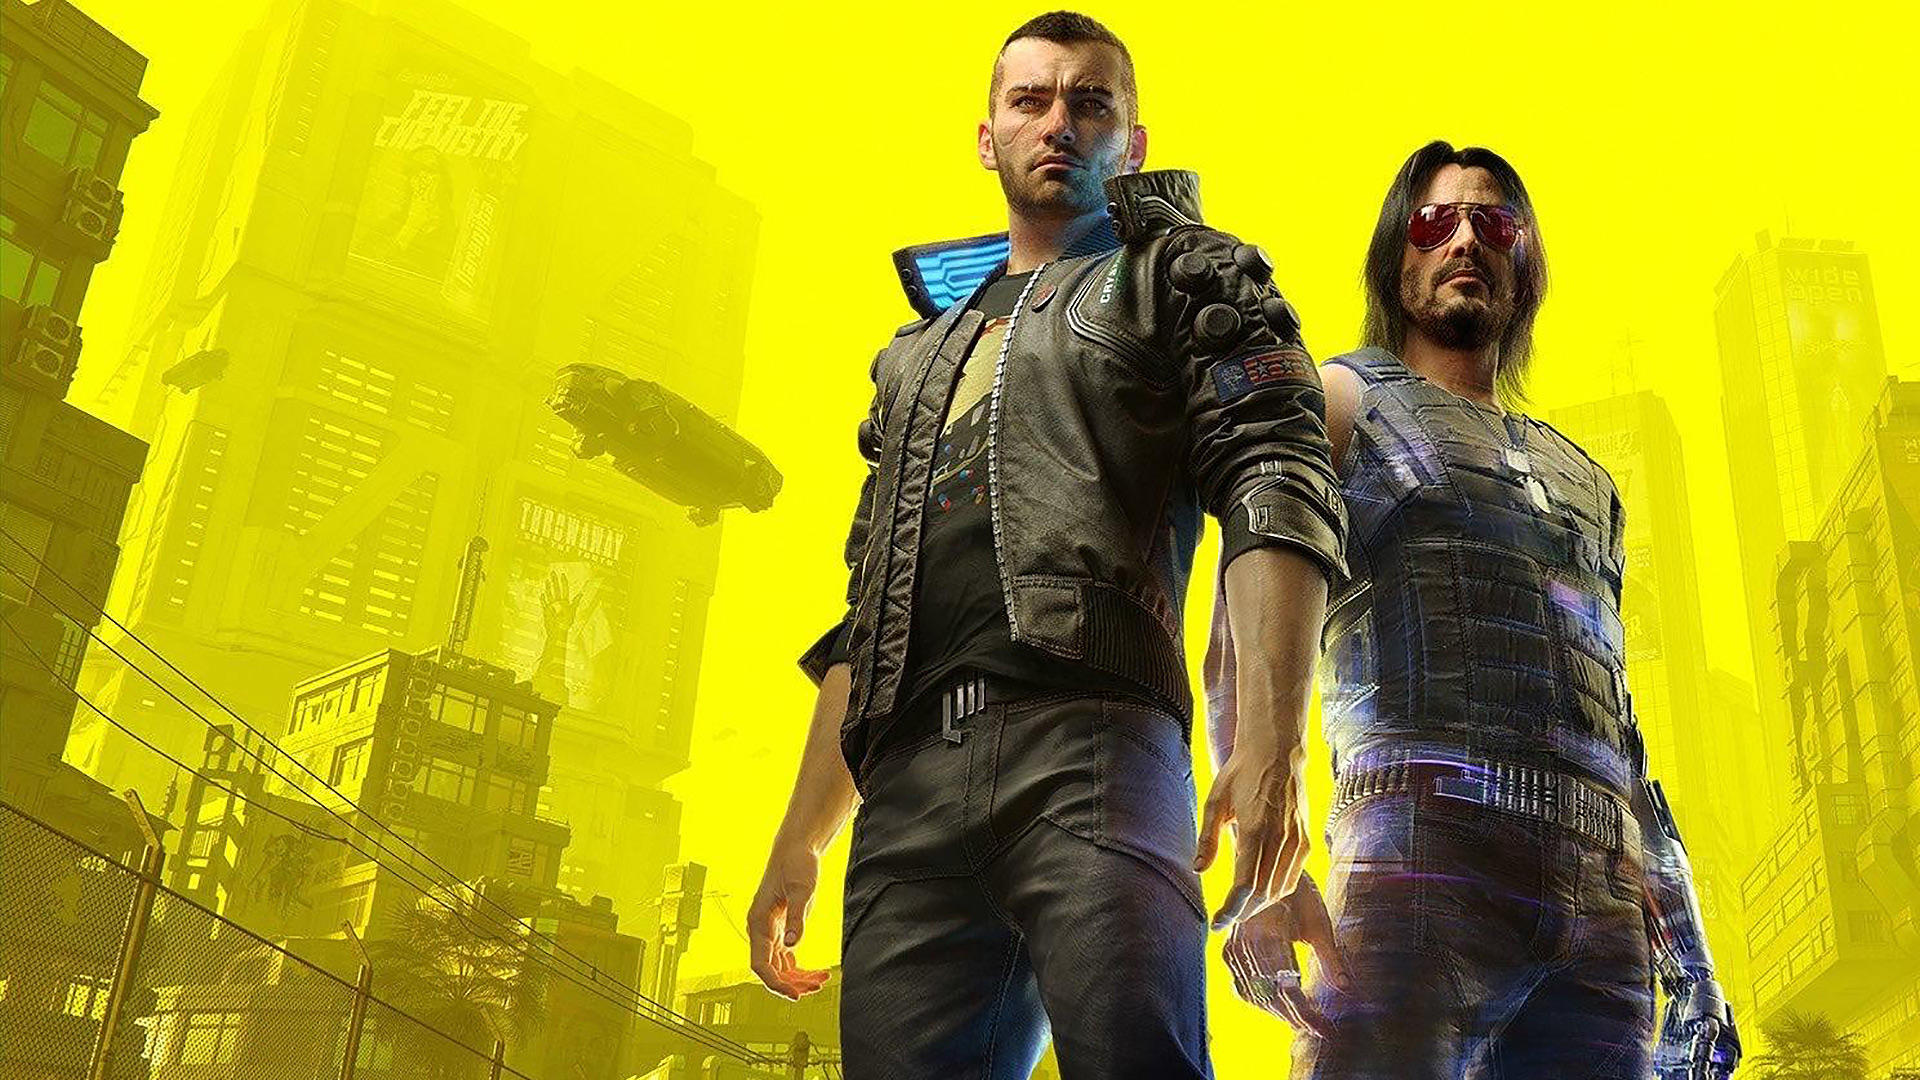 All Copies Of Cyberpunk 2077 Arrive With Some Digital Goodies, And More If You Link Your GOG.com Account